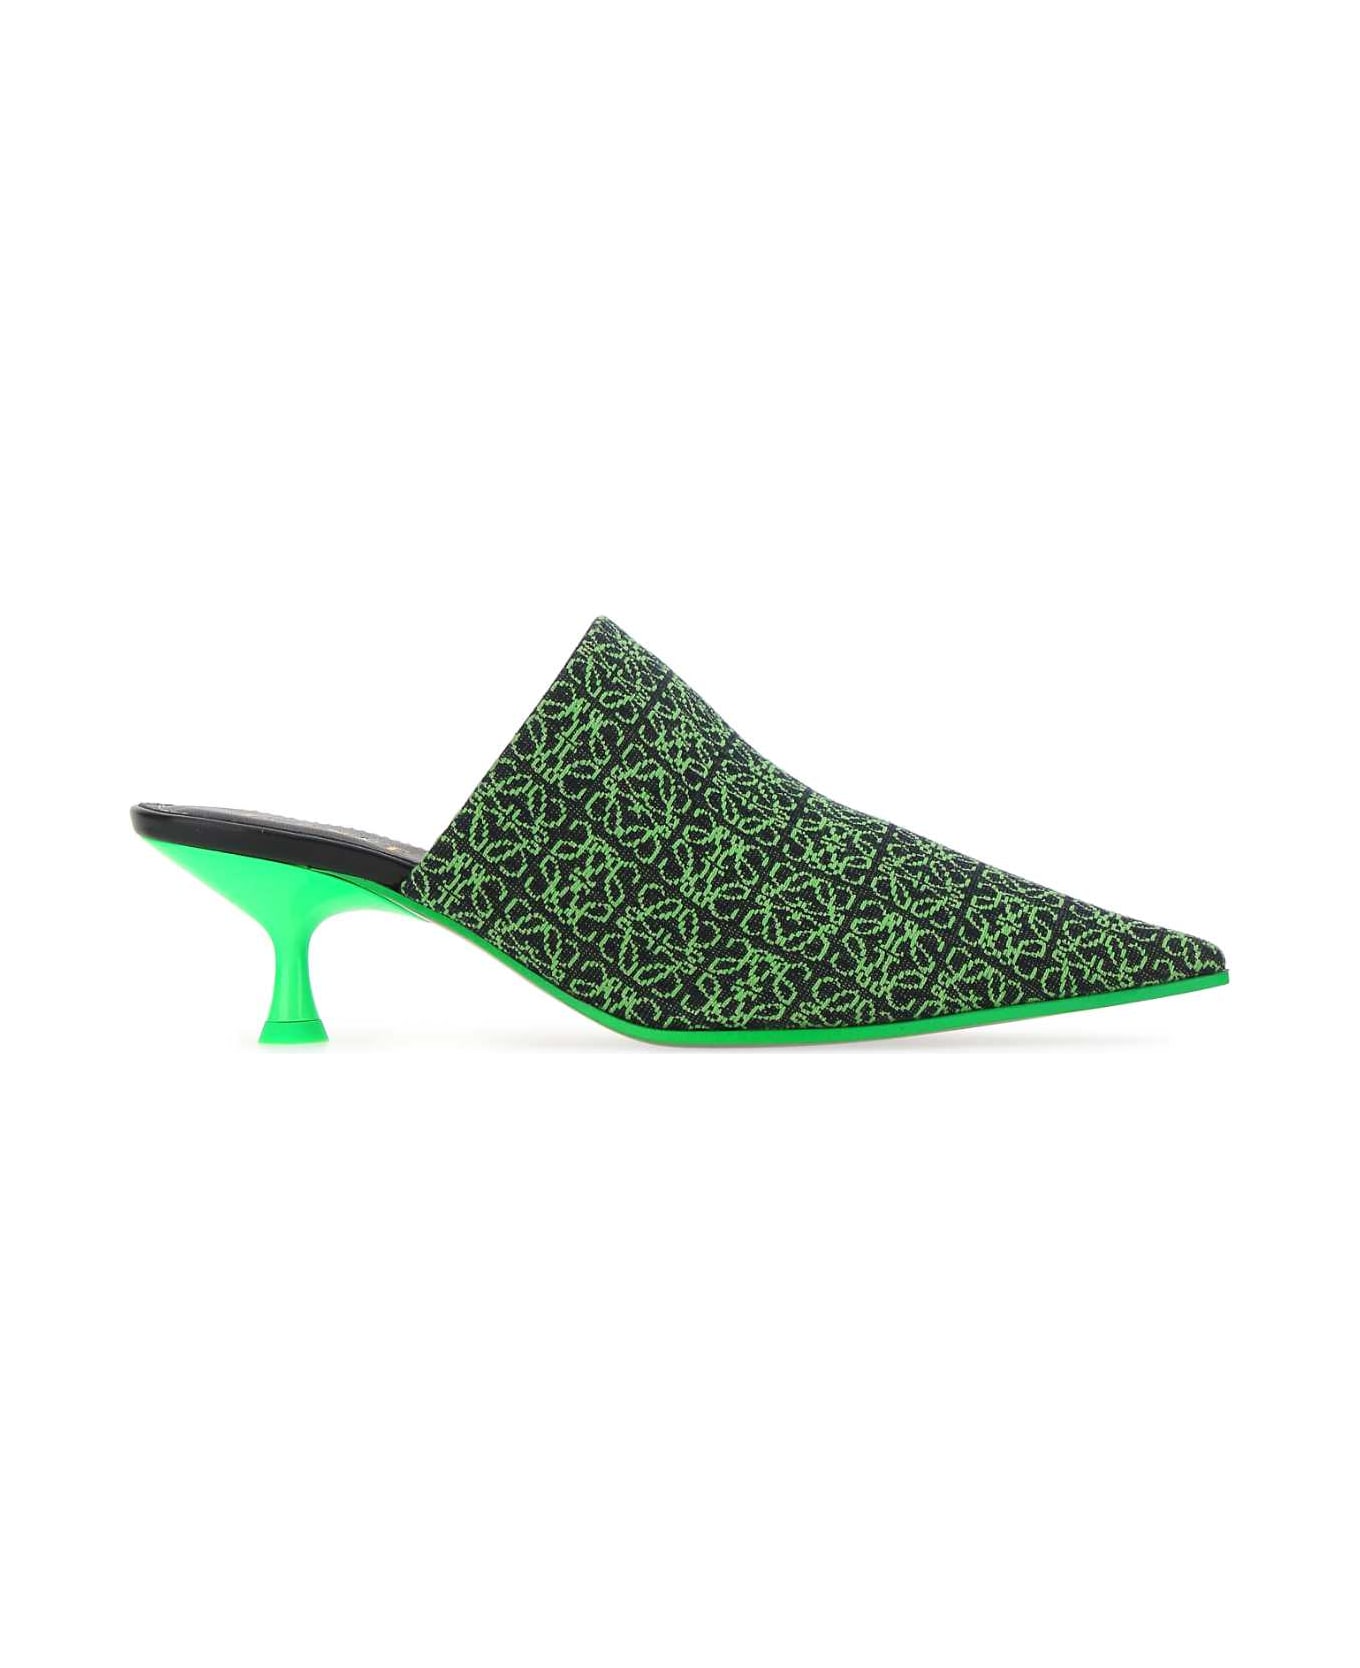 Loewe Embroidered Fabric Pointy Mules - BLACKNEONGREEN